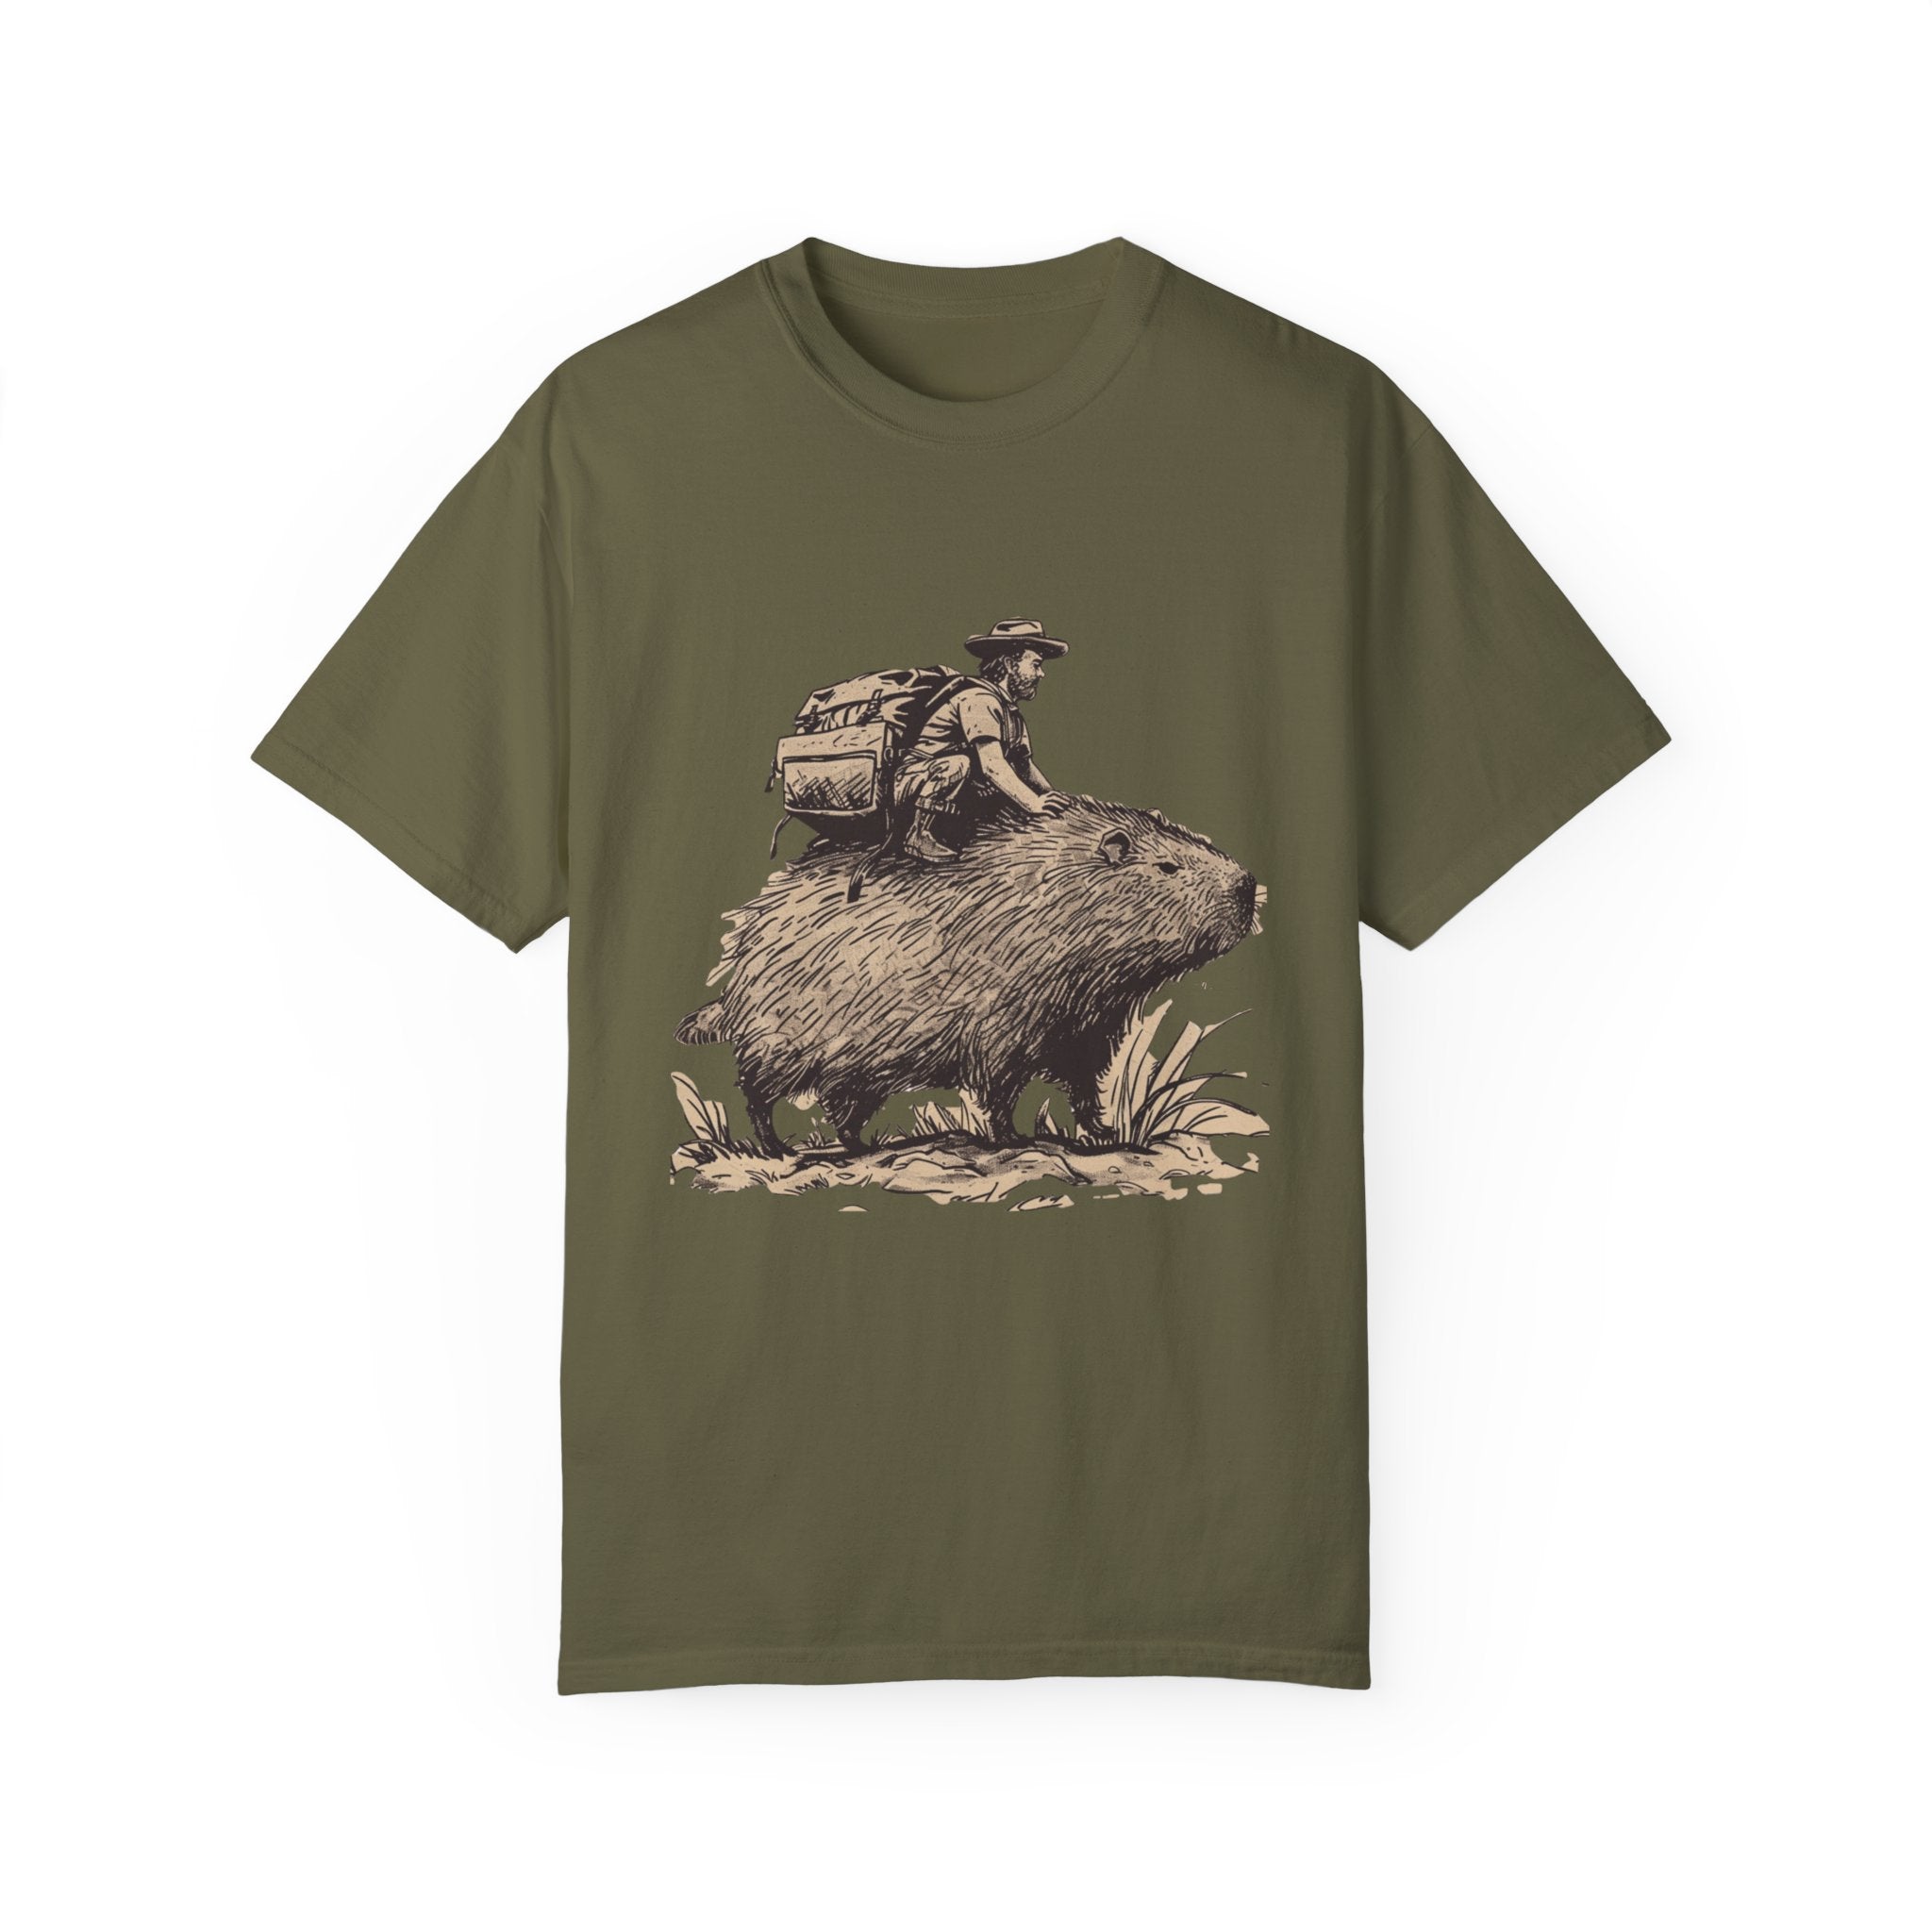 Capybara Rodent Print Funny T Shirt | Quirky Tee Design Sage Unisex